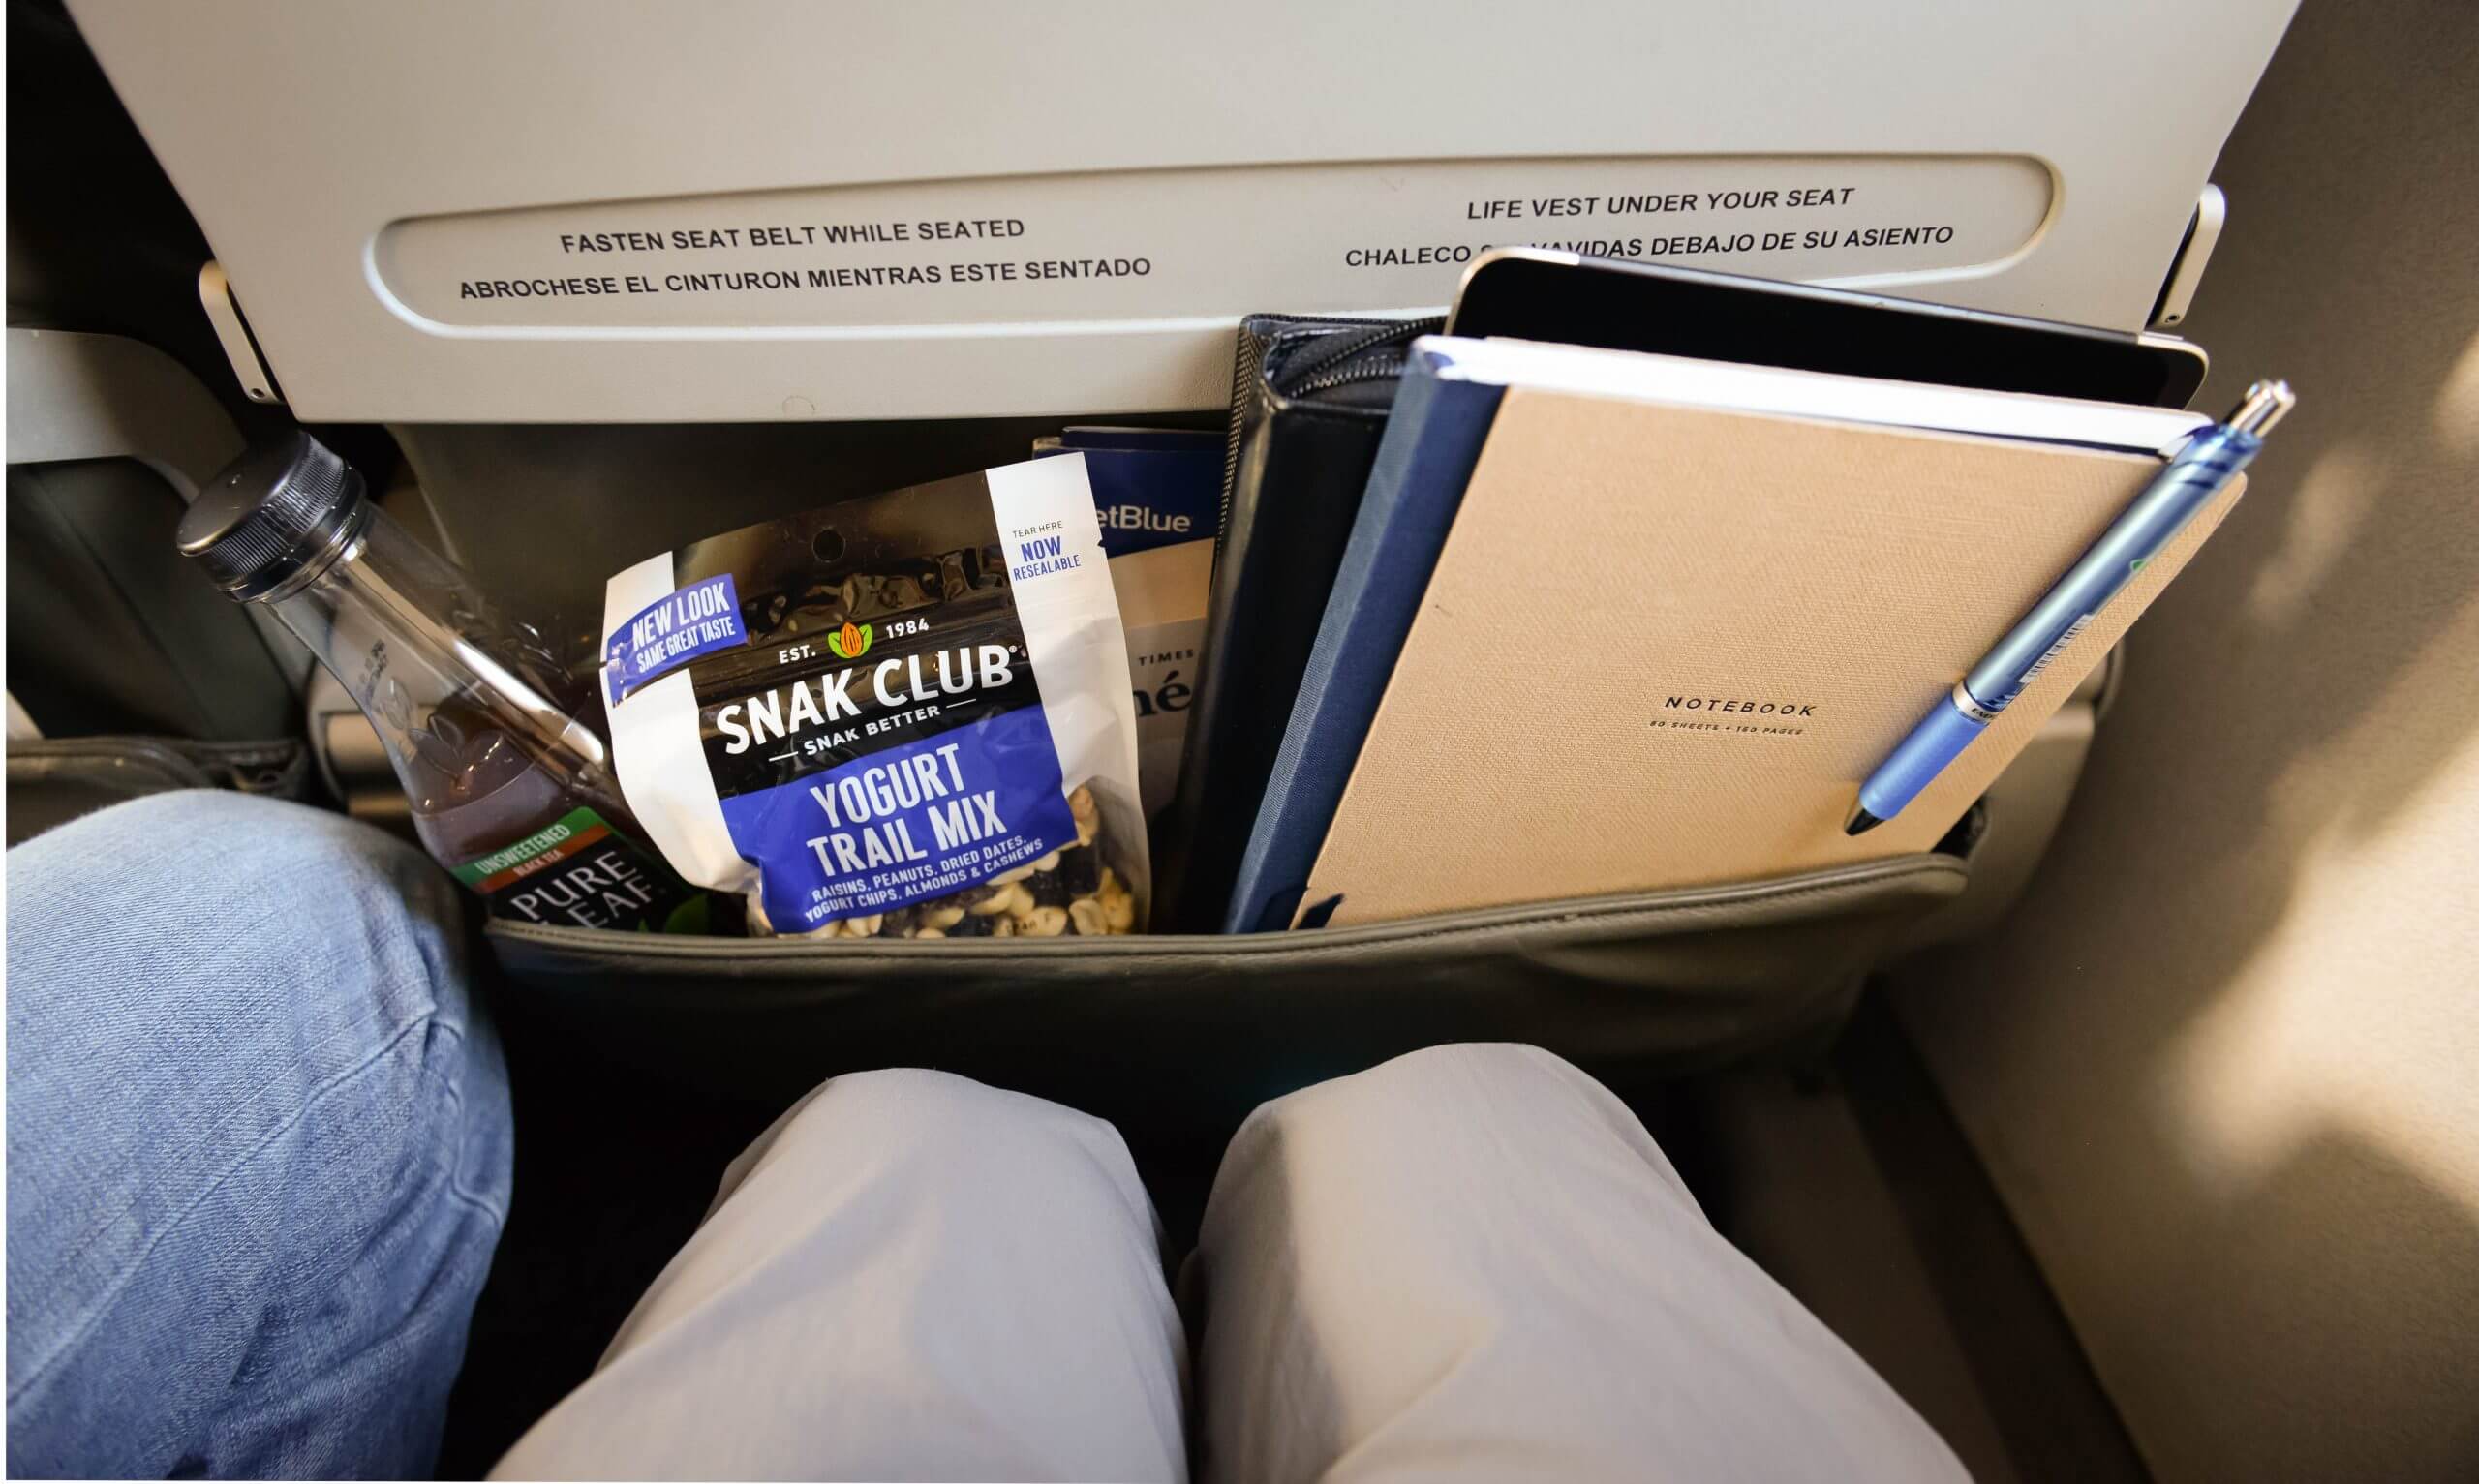 The back of an airplane seat includes a pocket with the following items: bottle of iced tea, bag of trail mix, notebook and pen.